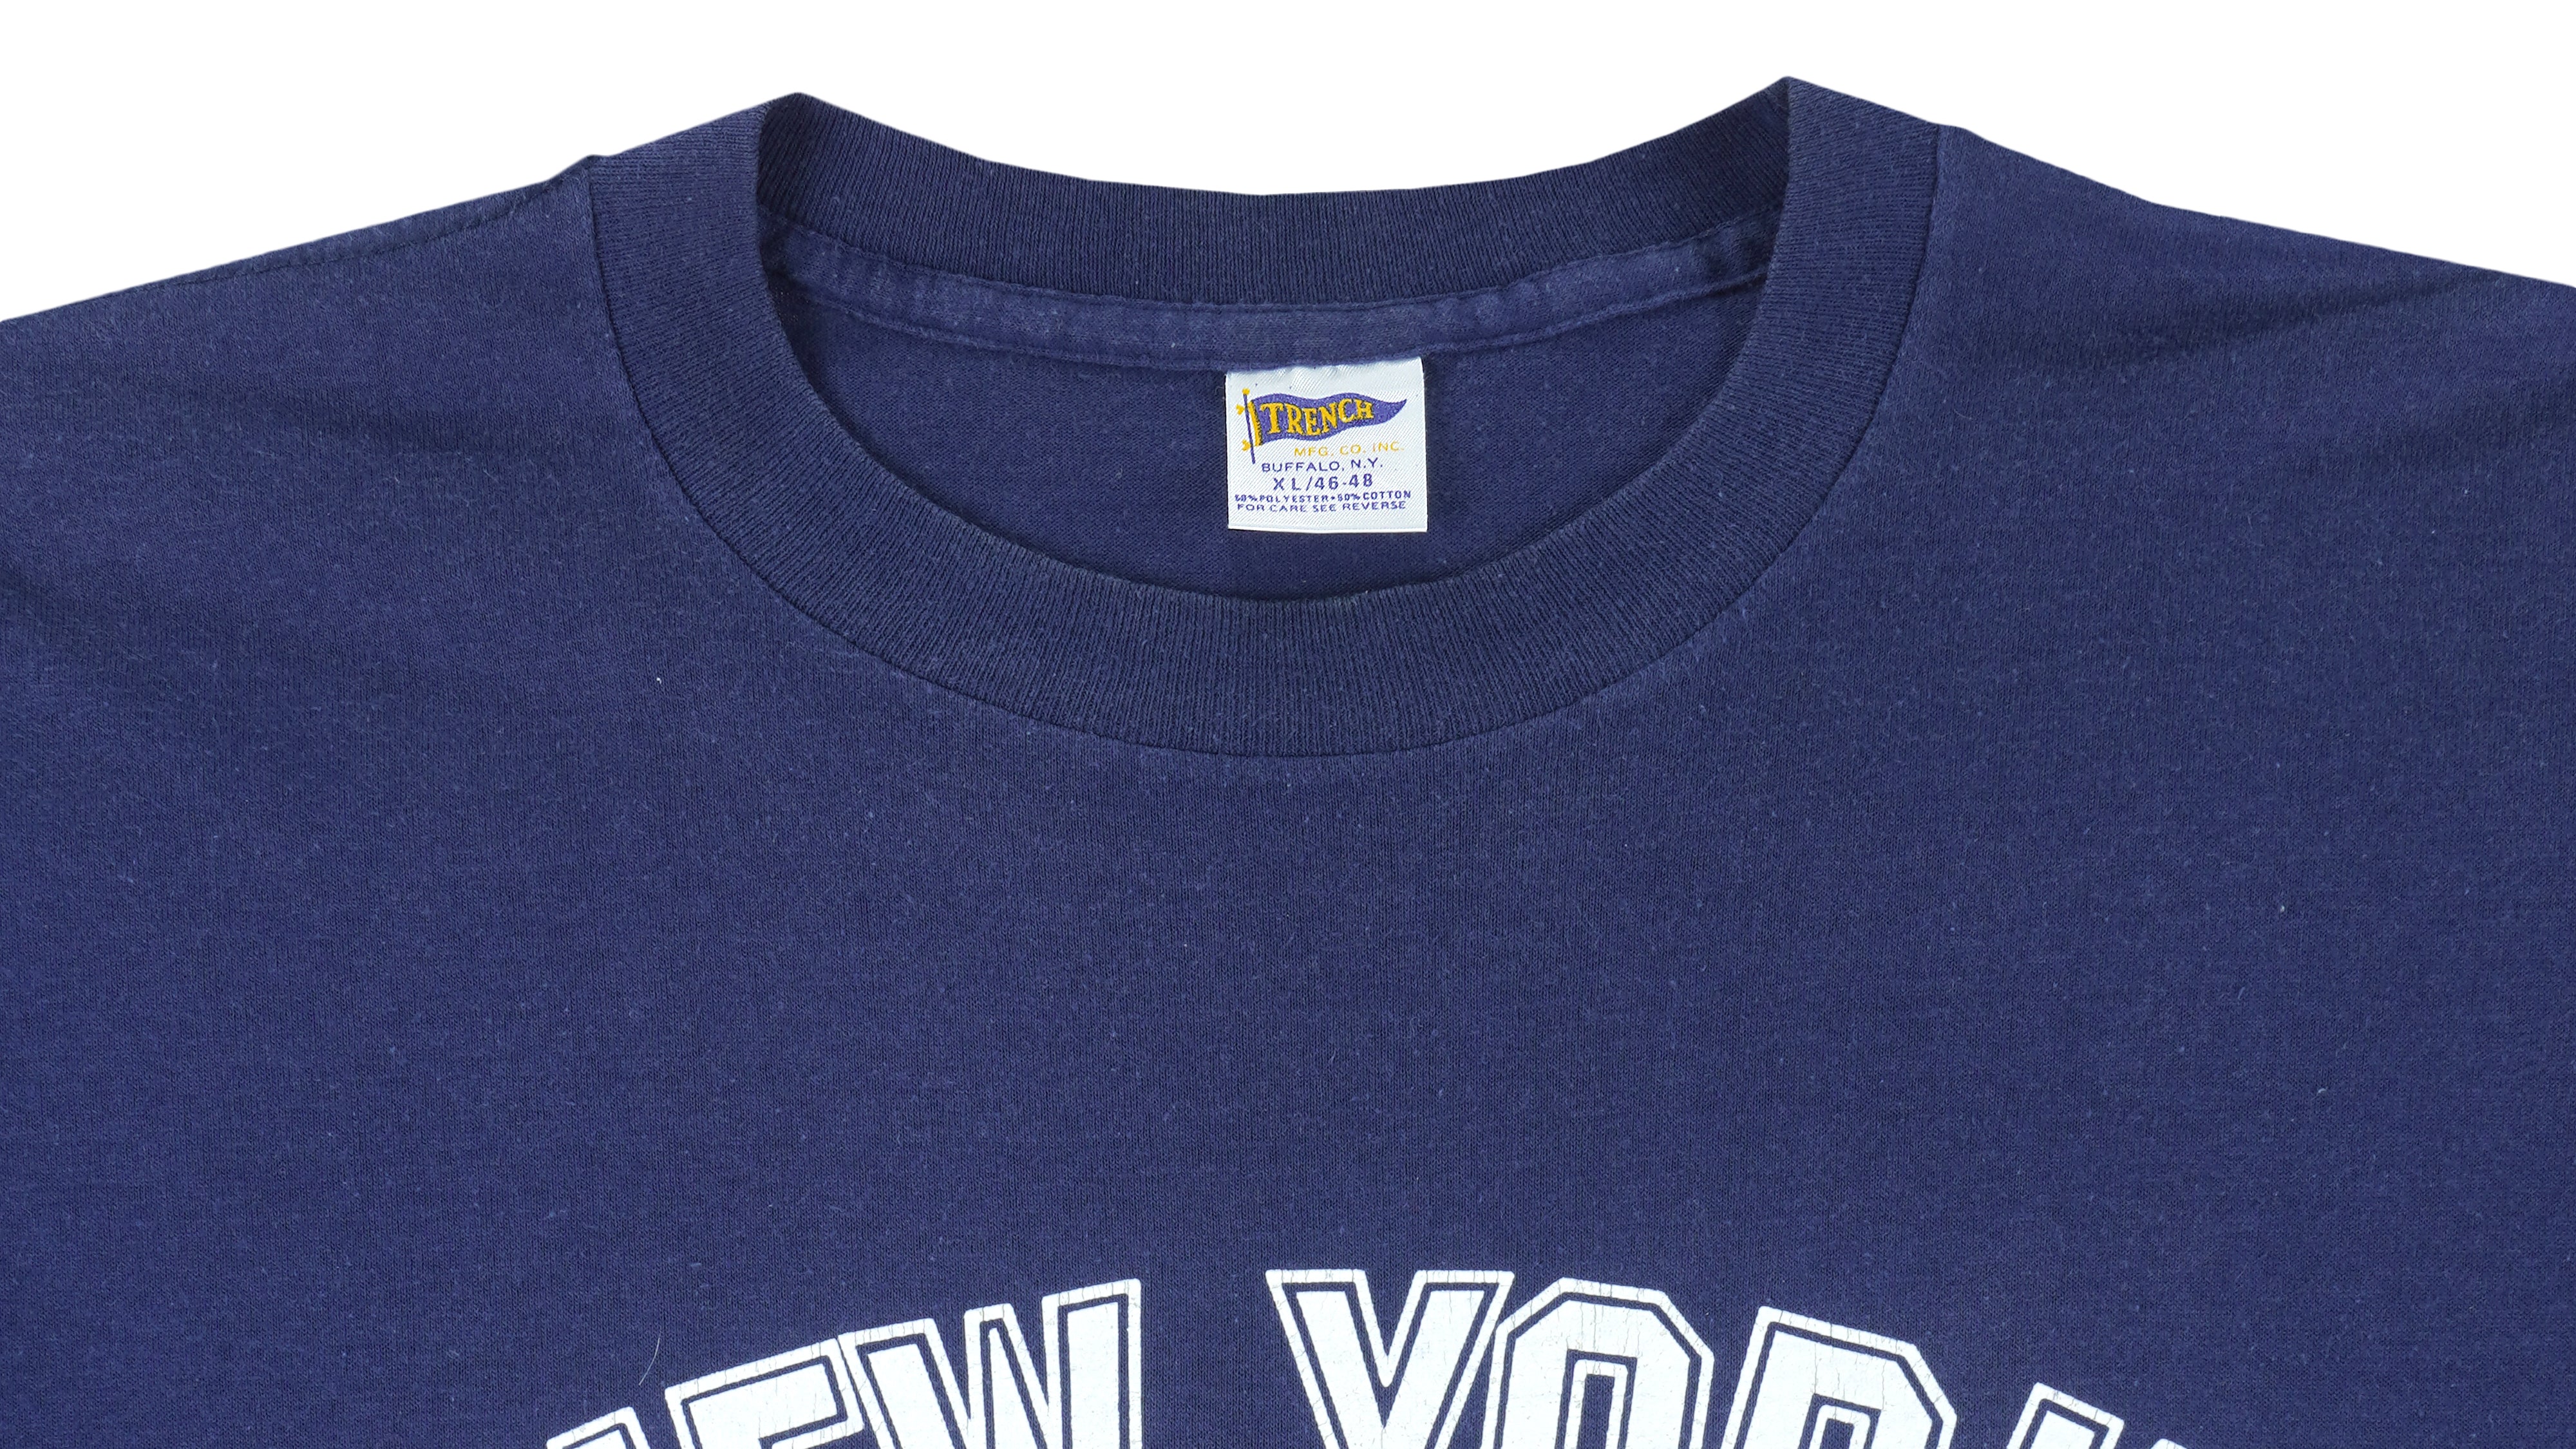 Vintage New York Mets Trench T-Shirt